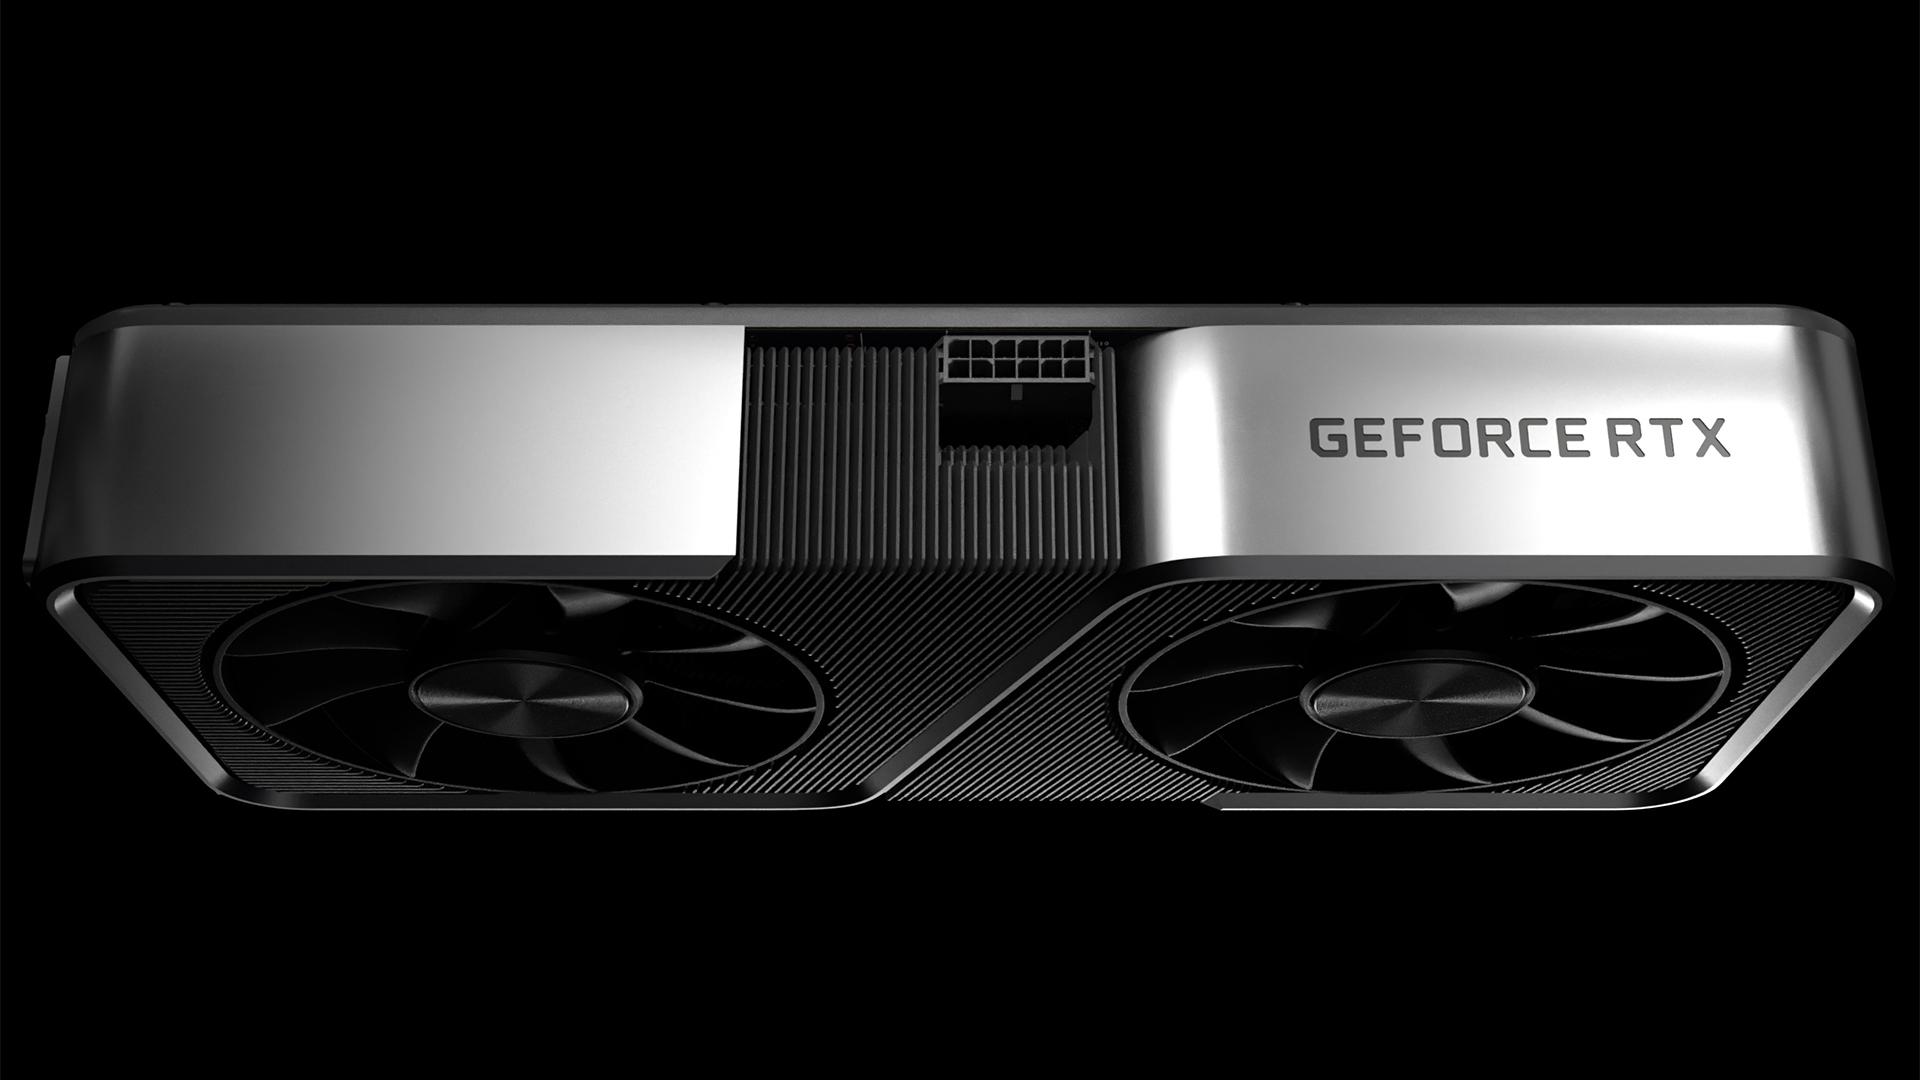 nvidia’s-rtx-2080-ti-can-be-modded-to-support-22gb-of-gddr6-memory